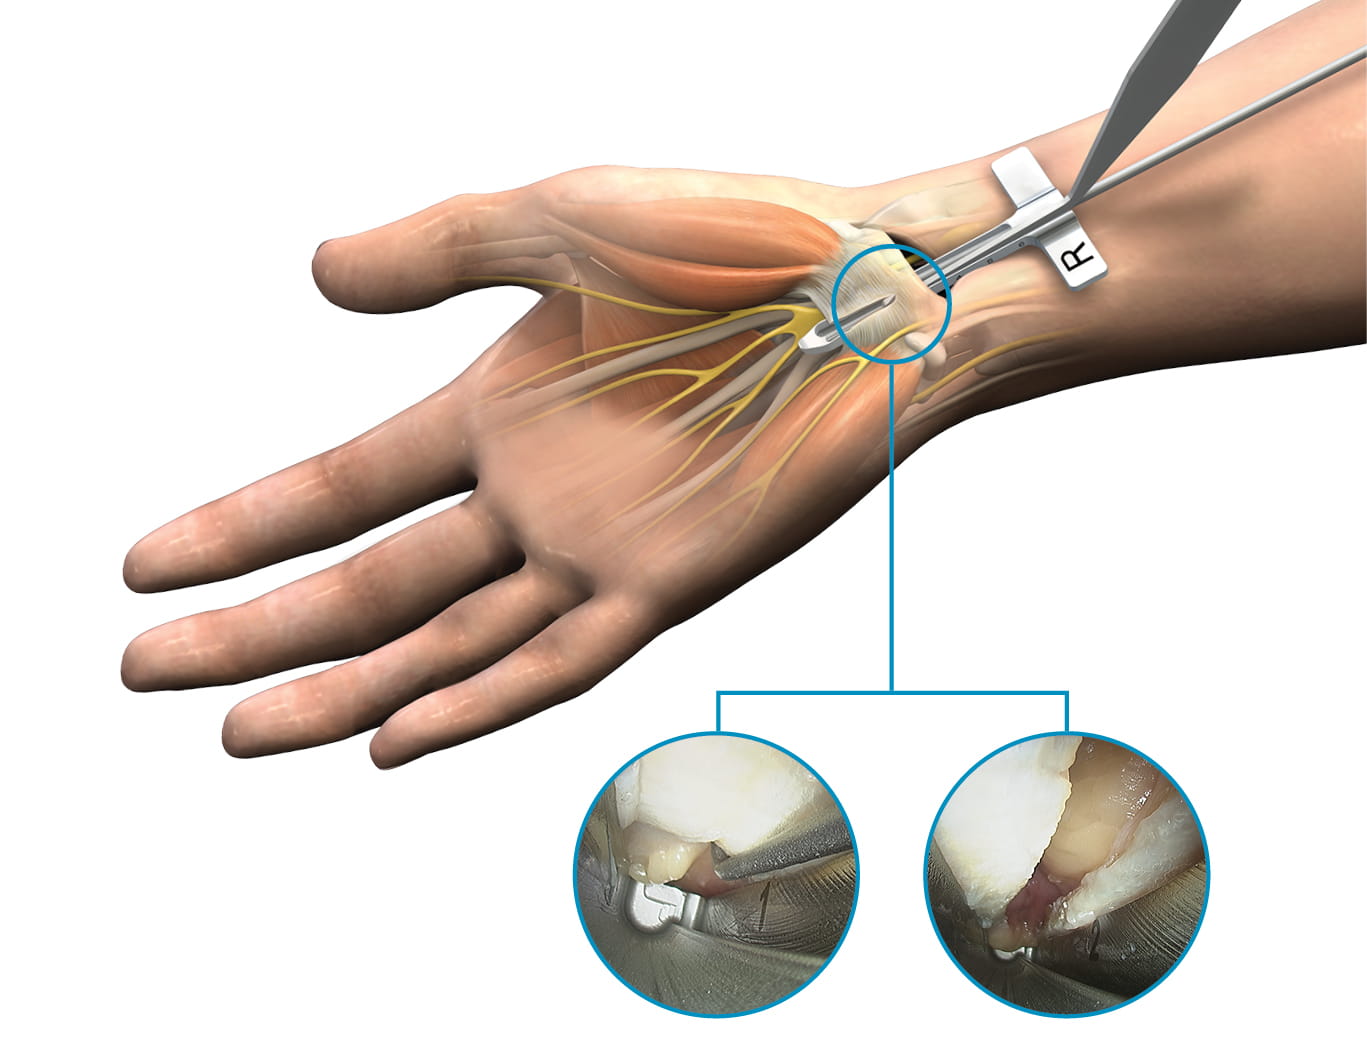 Illustration of carpal tunnel release with endoscopic kit